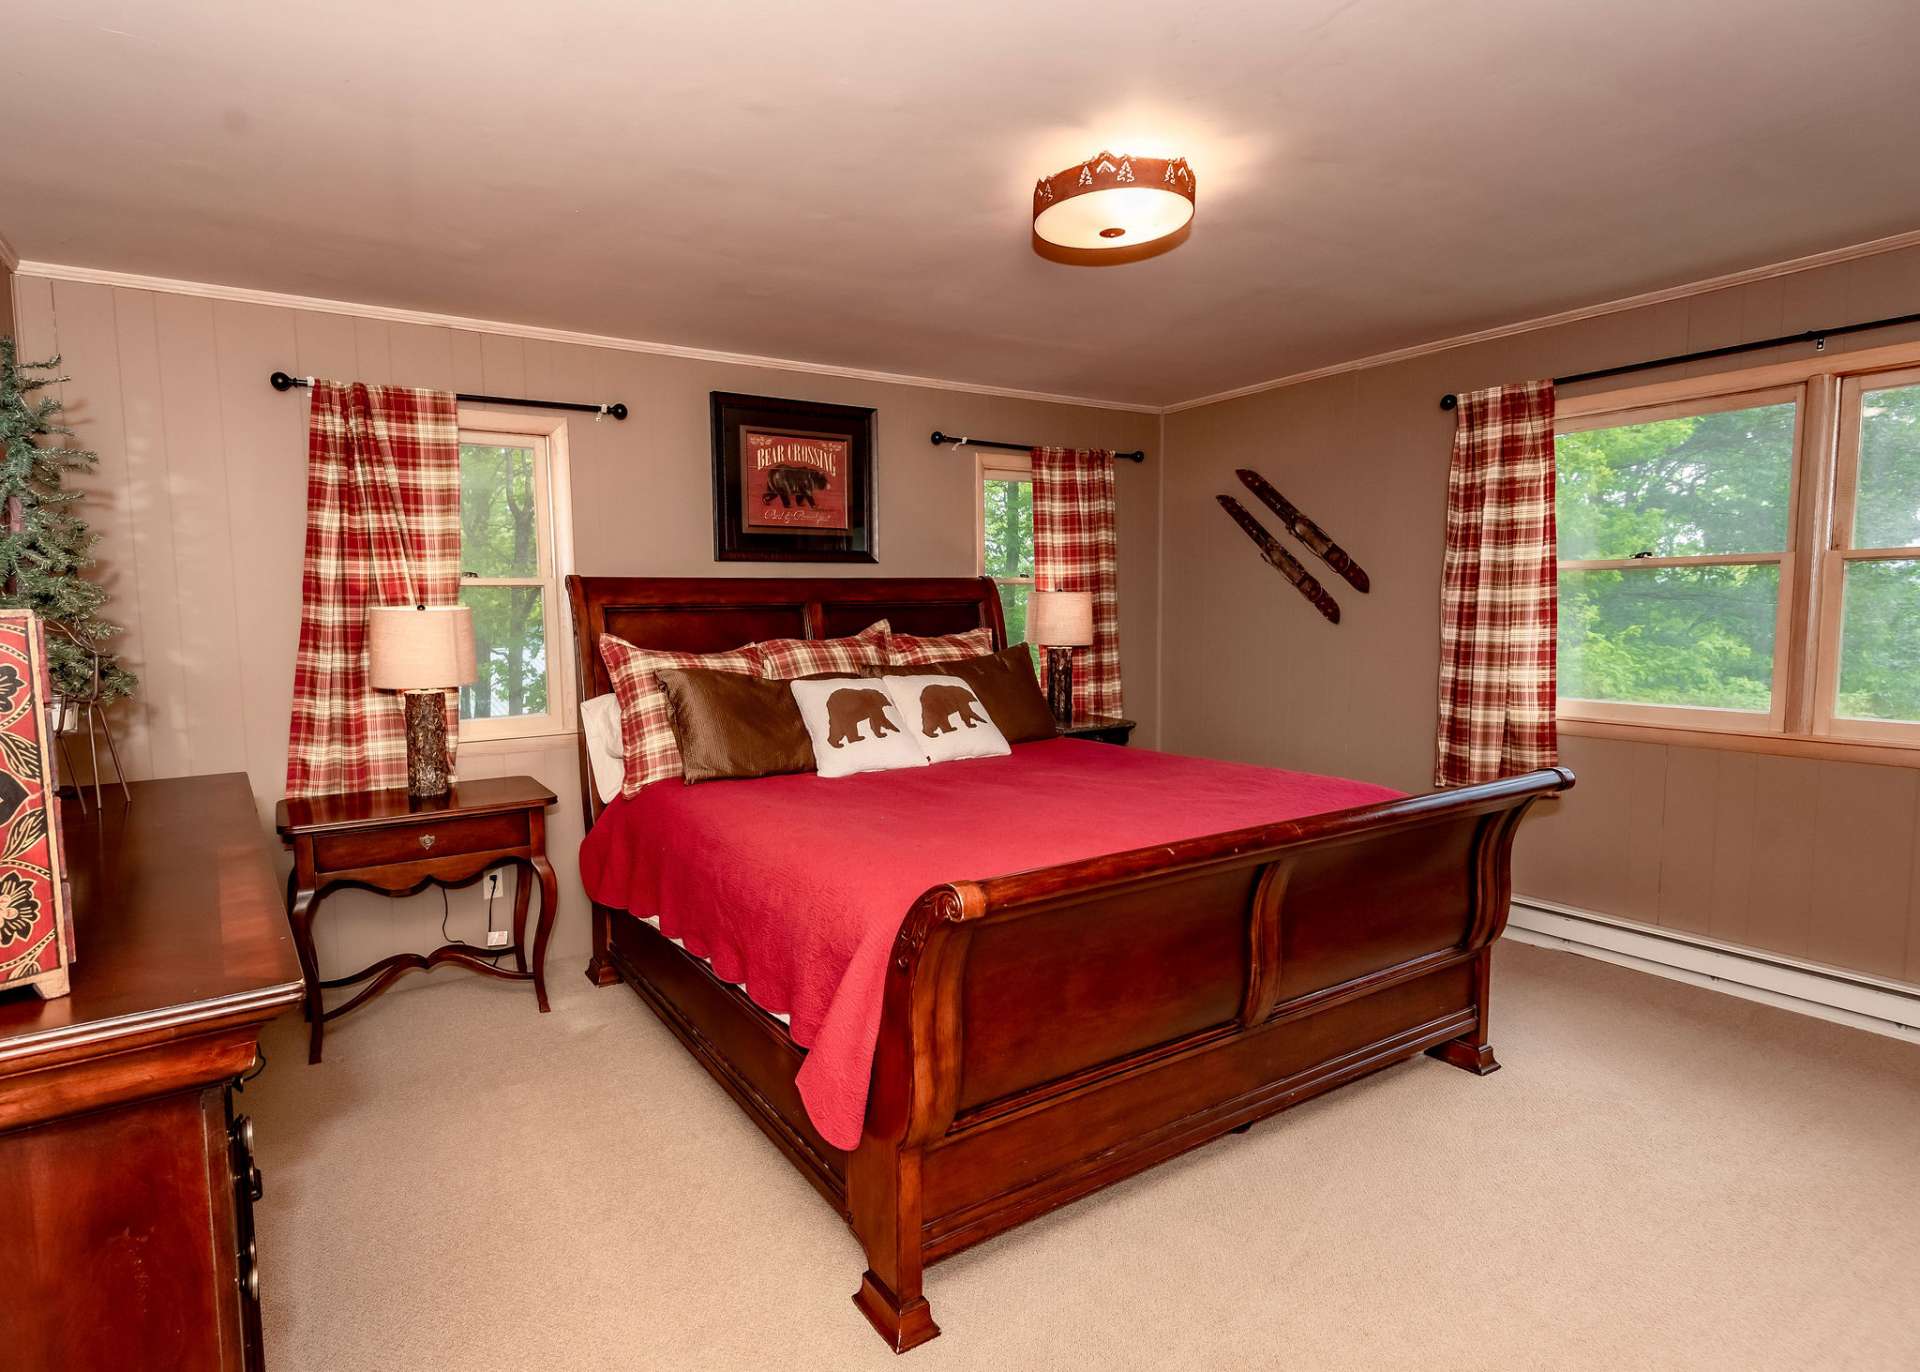 The upper level is also home to the master suite with private bath.